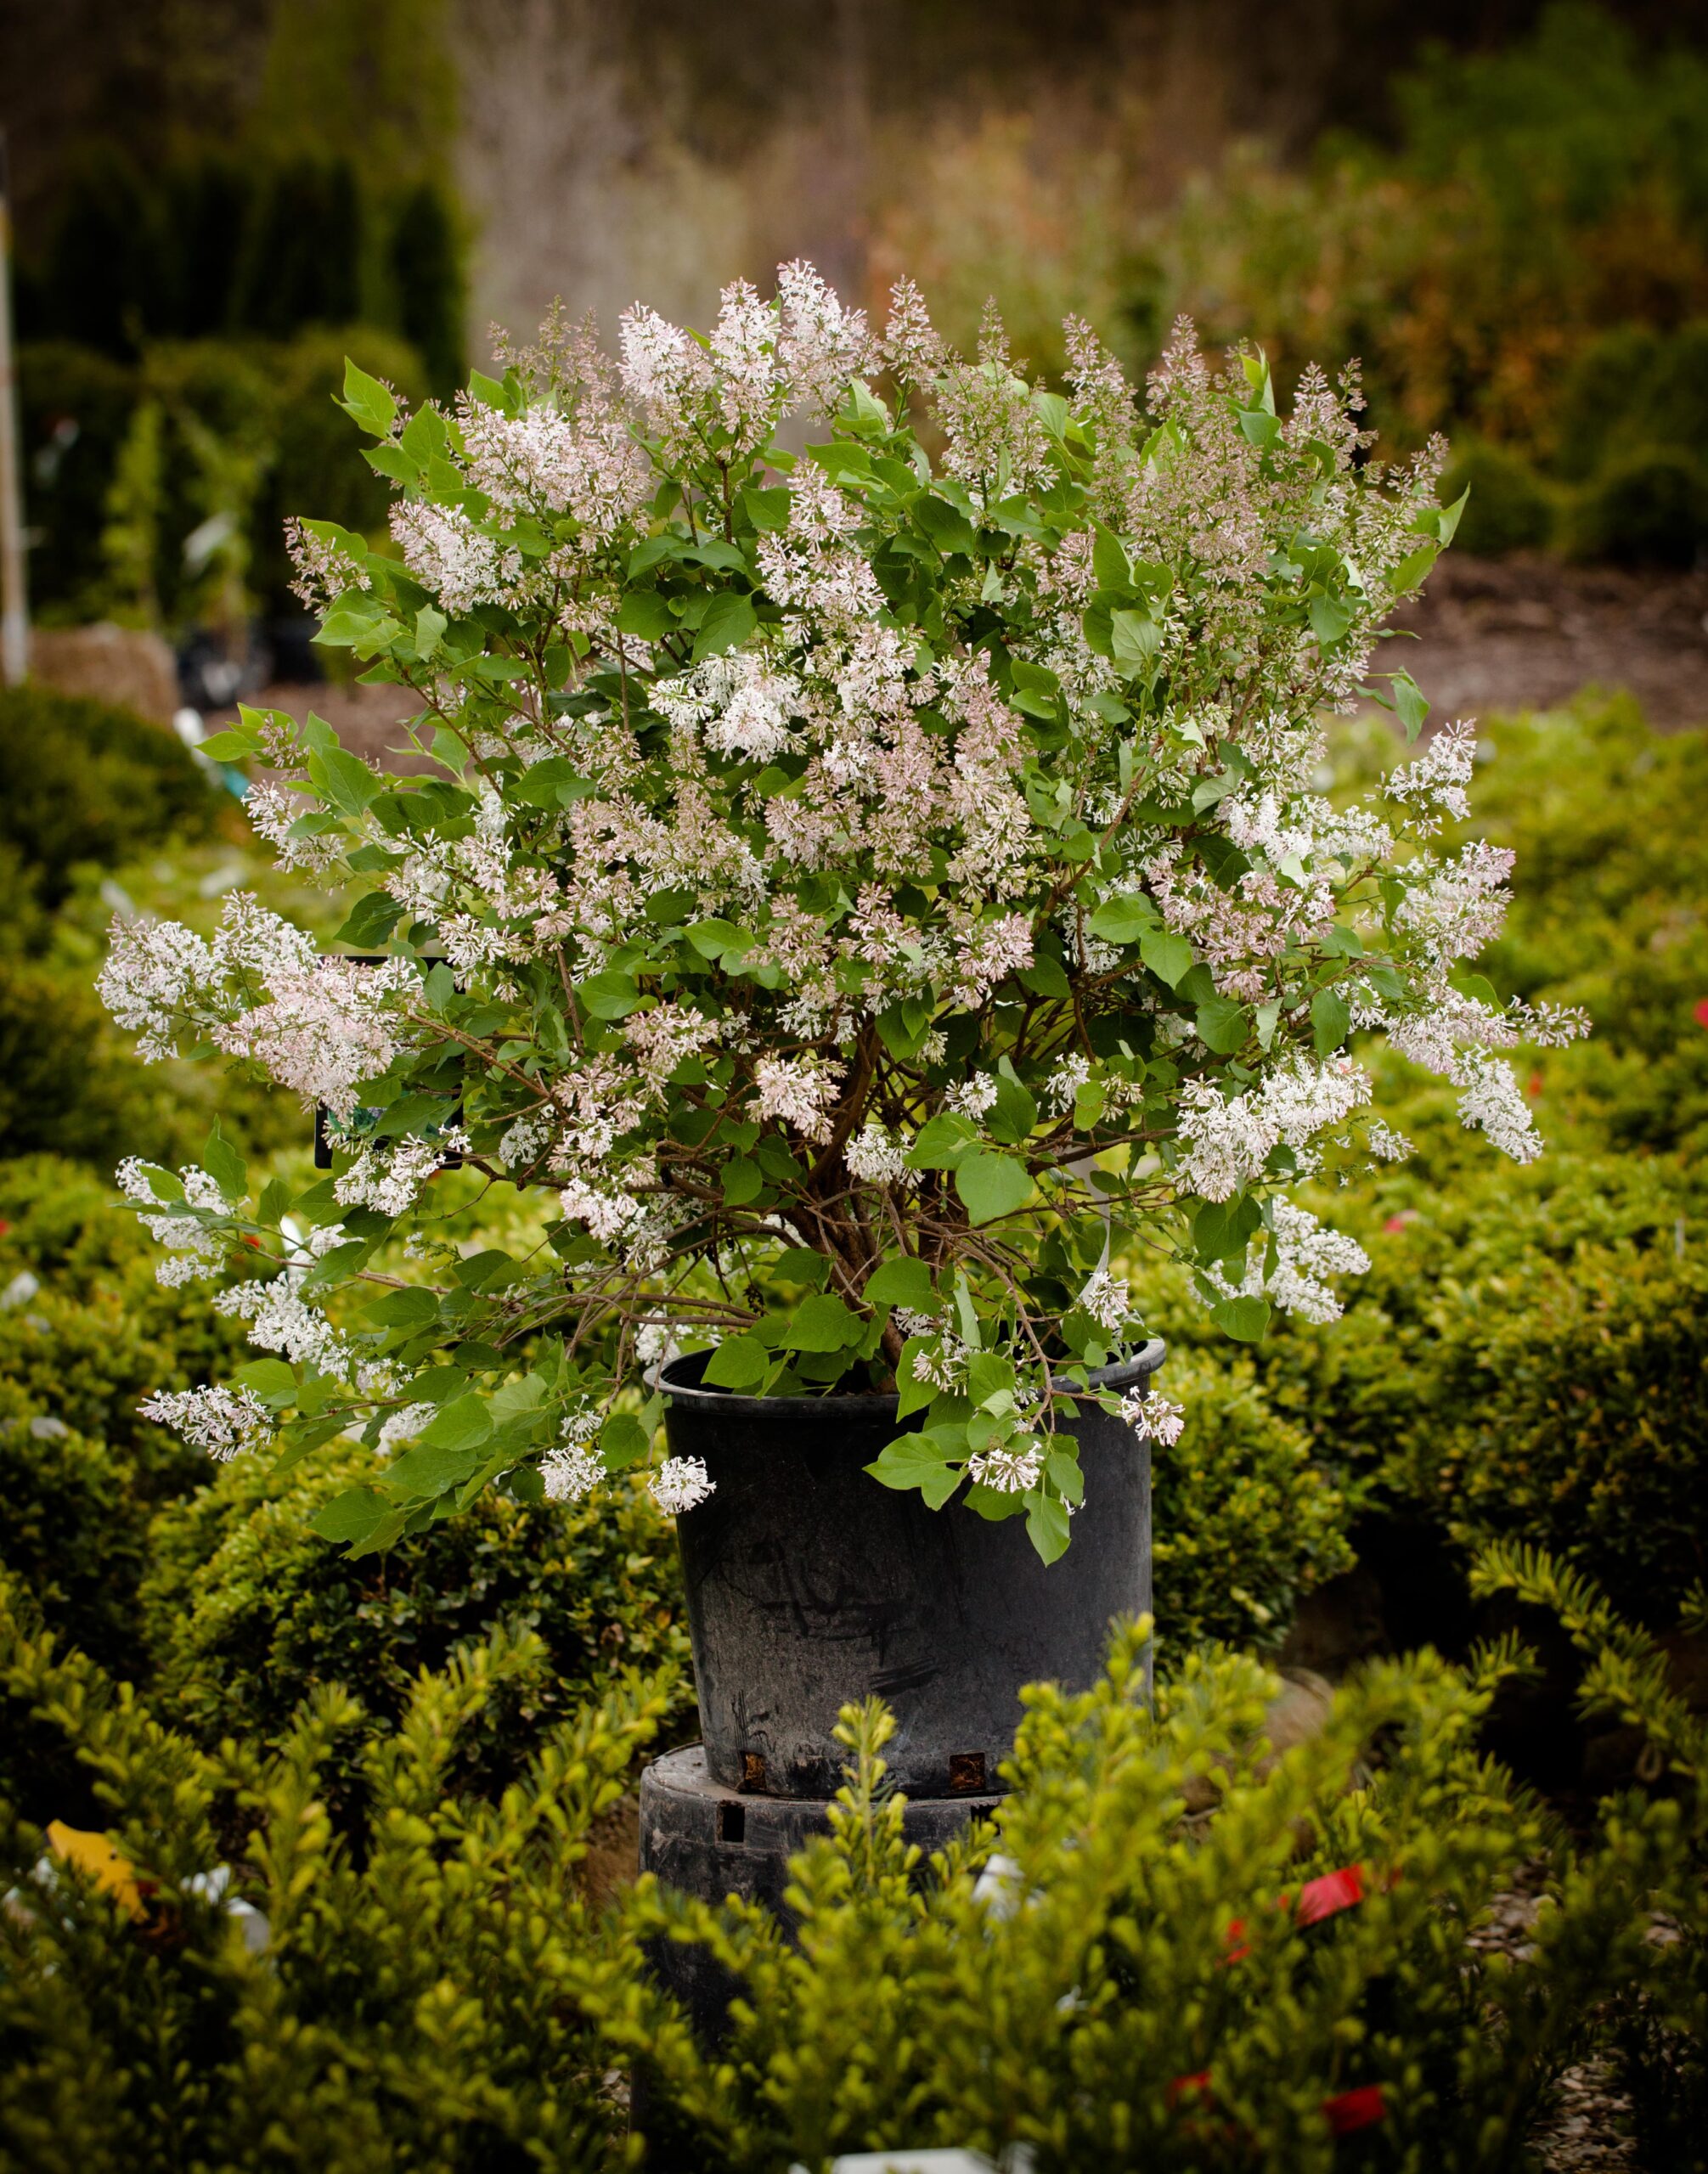 blooming white lilac in a black pot surrounded by blurred green shrubs